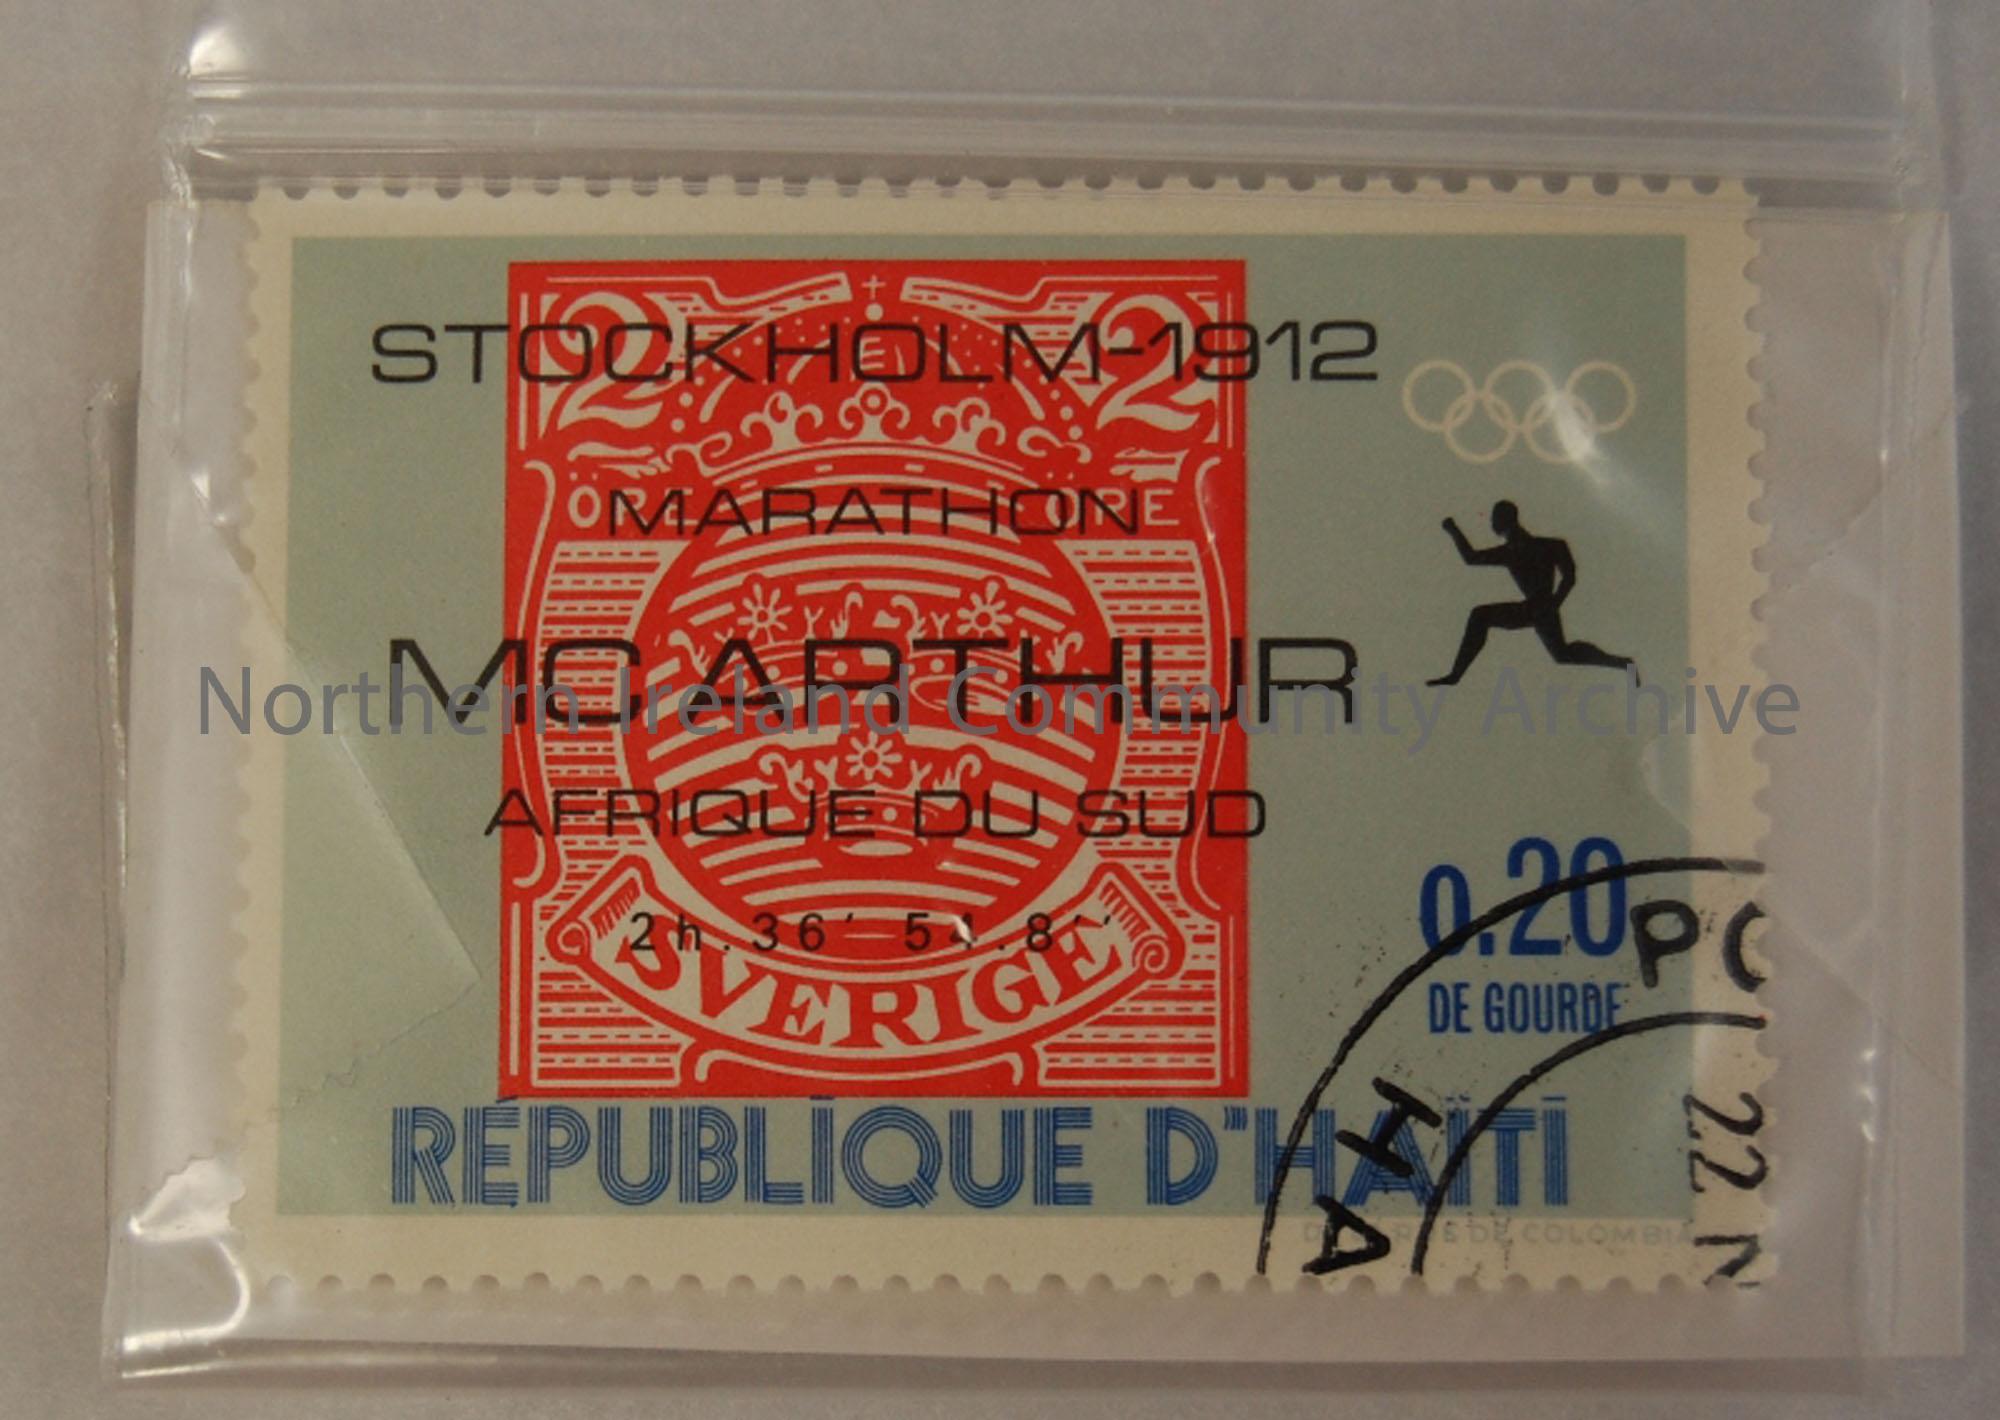 stamp commemorating McArthur’s marathon win at the Stockholm Olympic Games, 1912